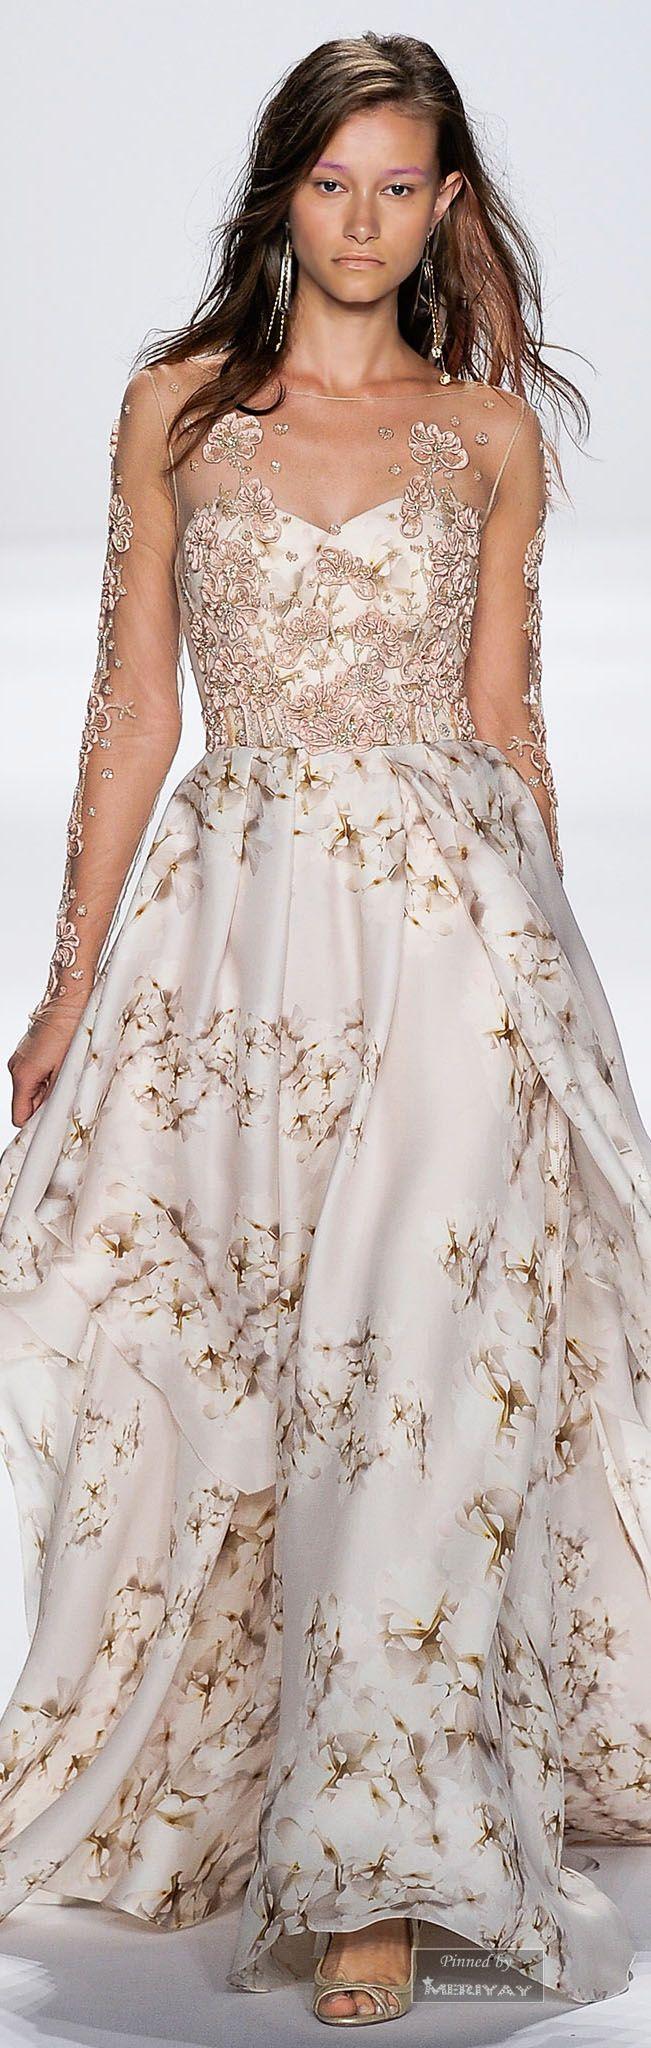 Свадьба - Badgley Mischka Spring 2015 Ready-to-Wear - Collection - Gallery